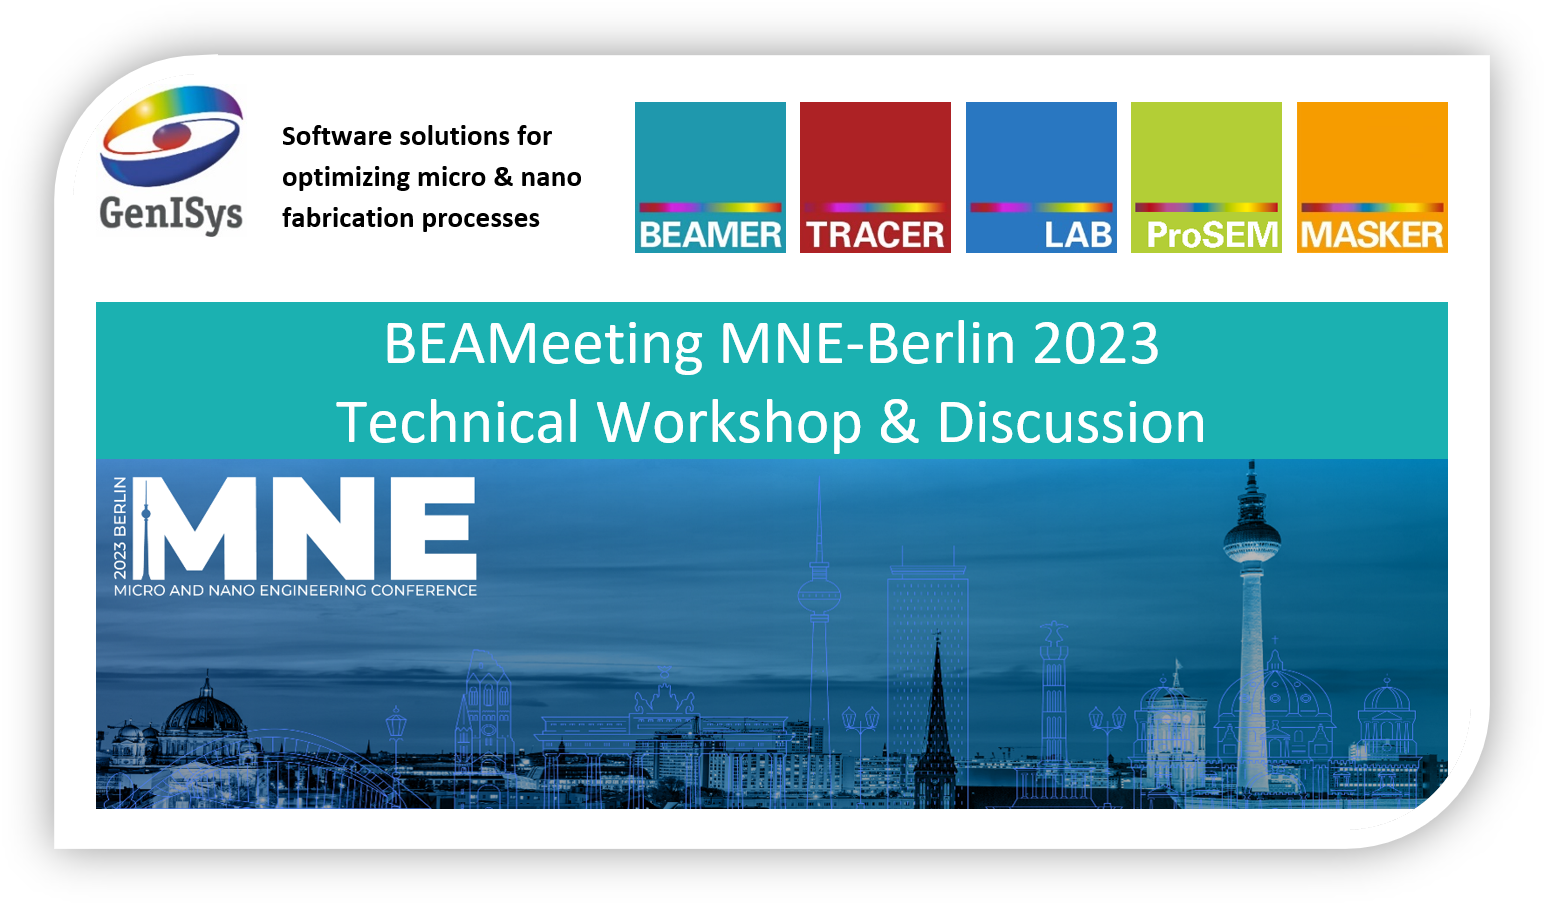 MNE – Micro and Nano Engineering Conference 25. – 28.09.2023 in Berlin  Germany – Microresist